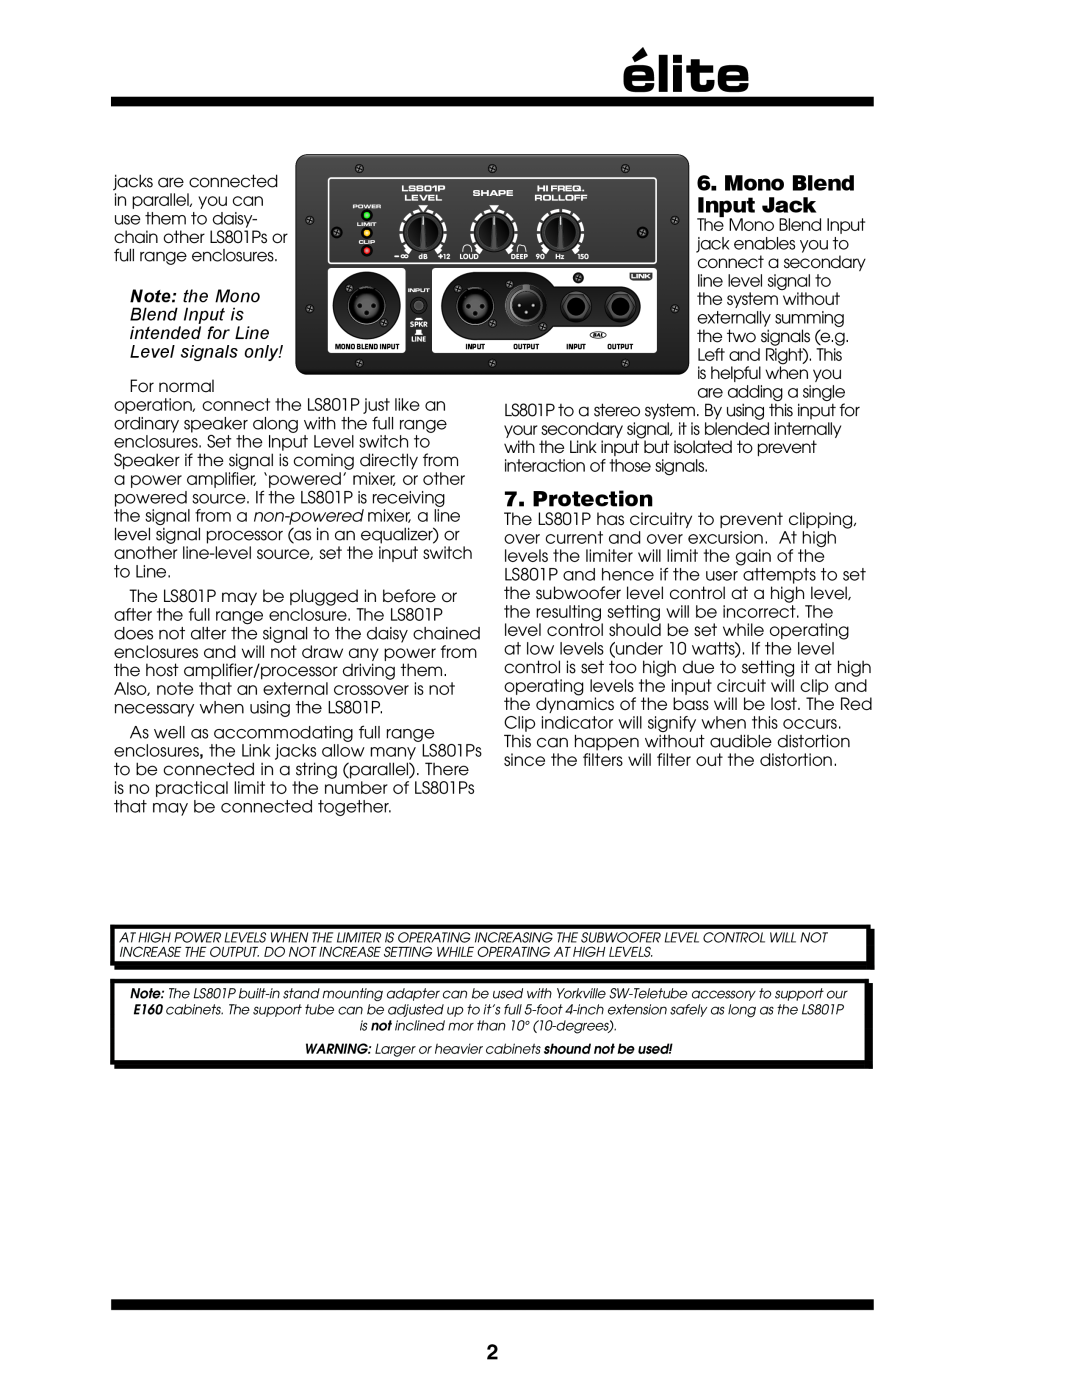 Yorkville Sound LS801P owner manual Mono Blend, Input Jack, Protection, Note the Mono, Blend Input is, intended for Line 